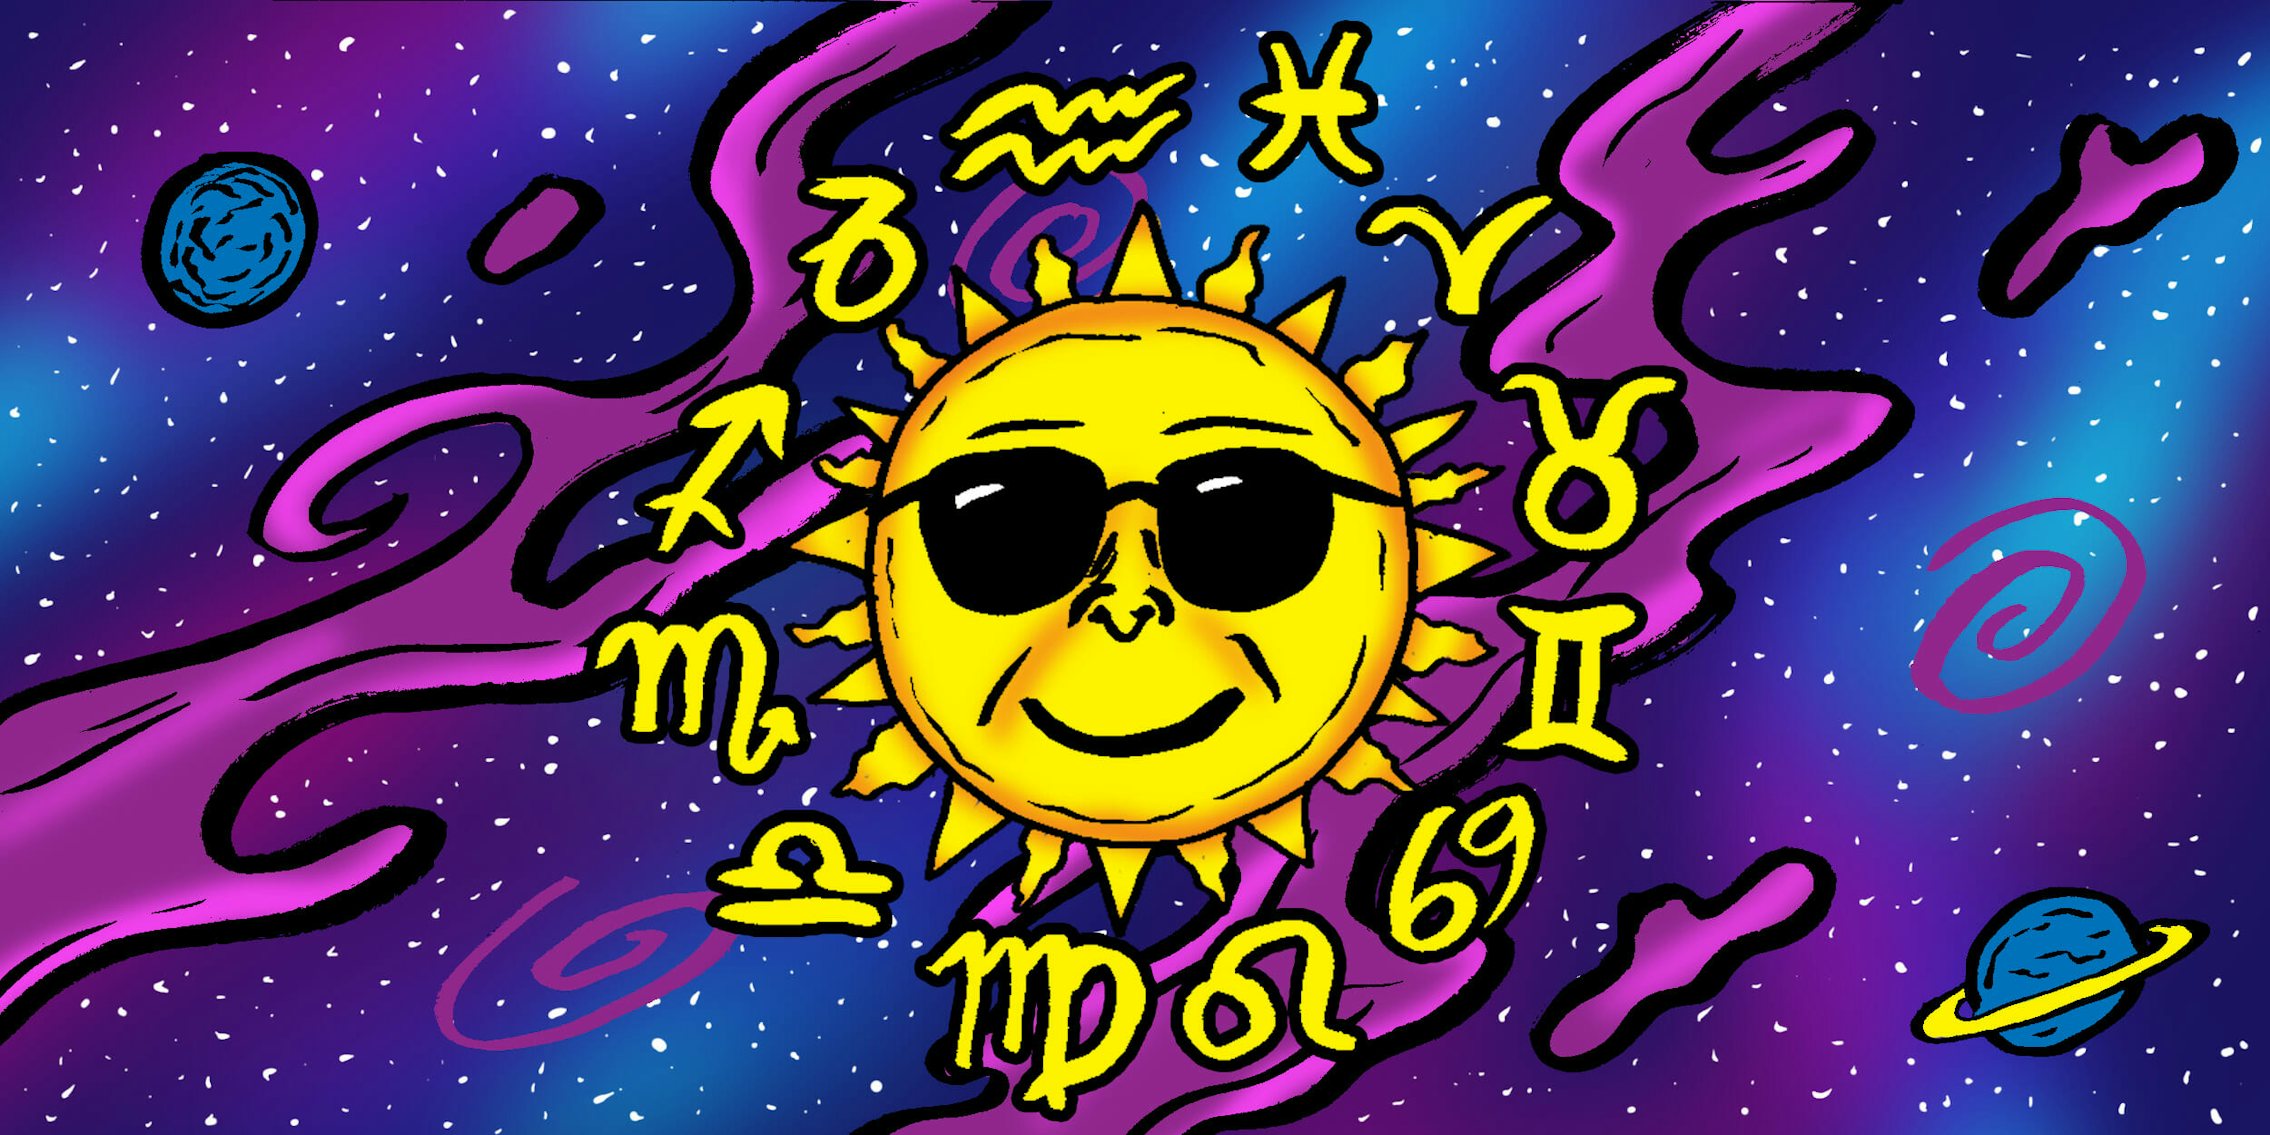 Cosmic background with sun emoji and symbols circling it